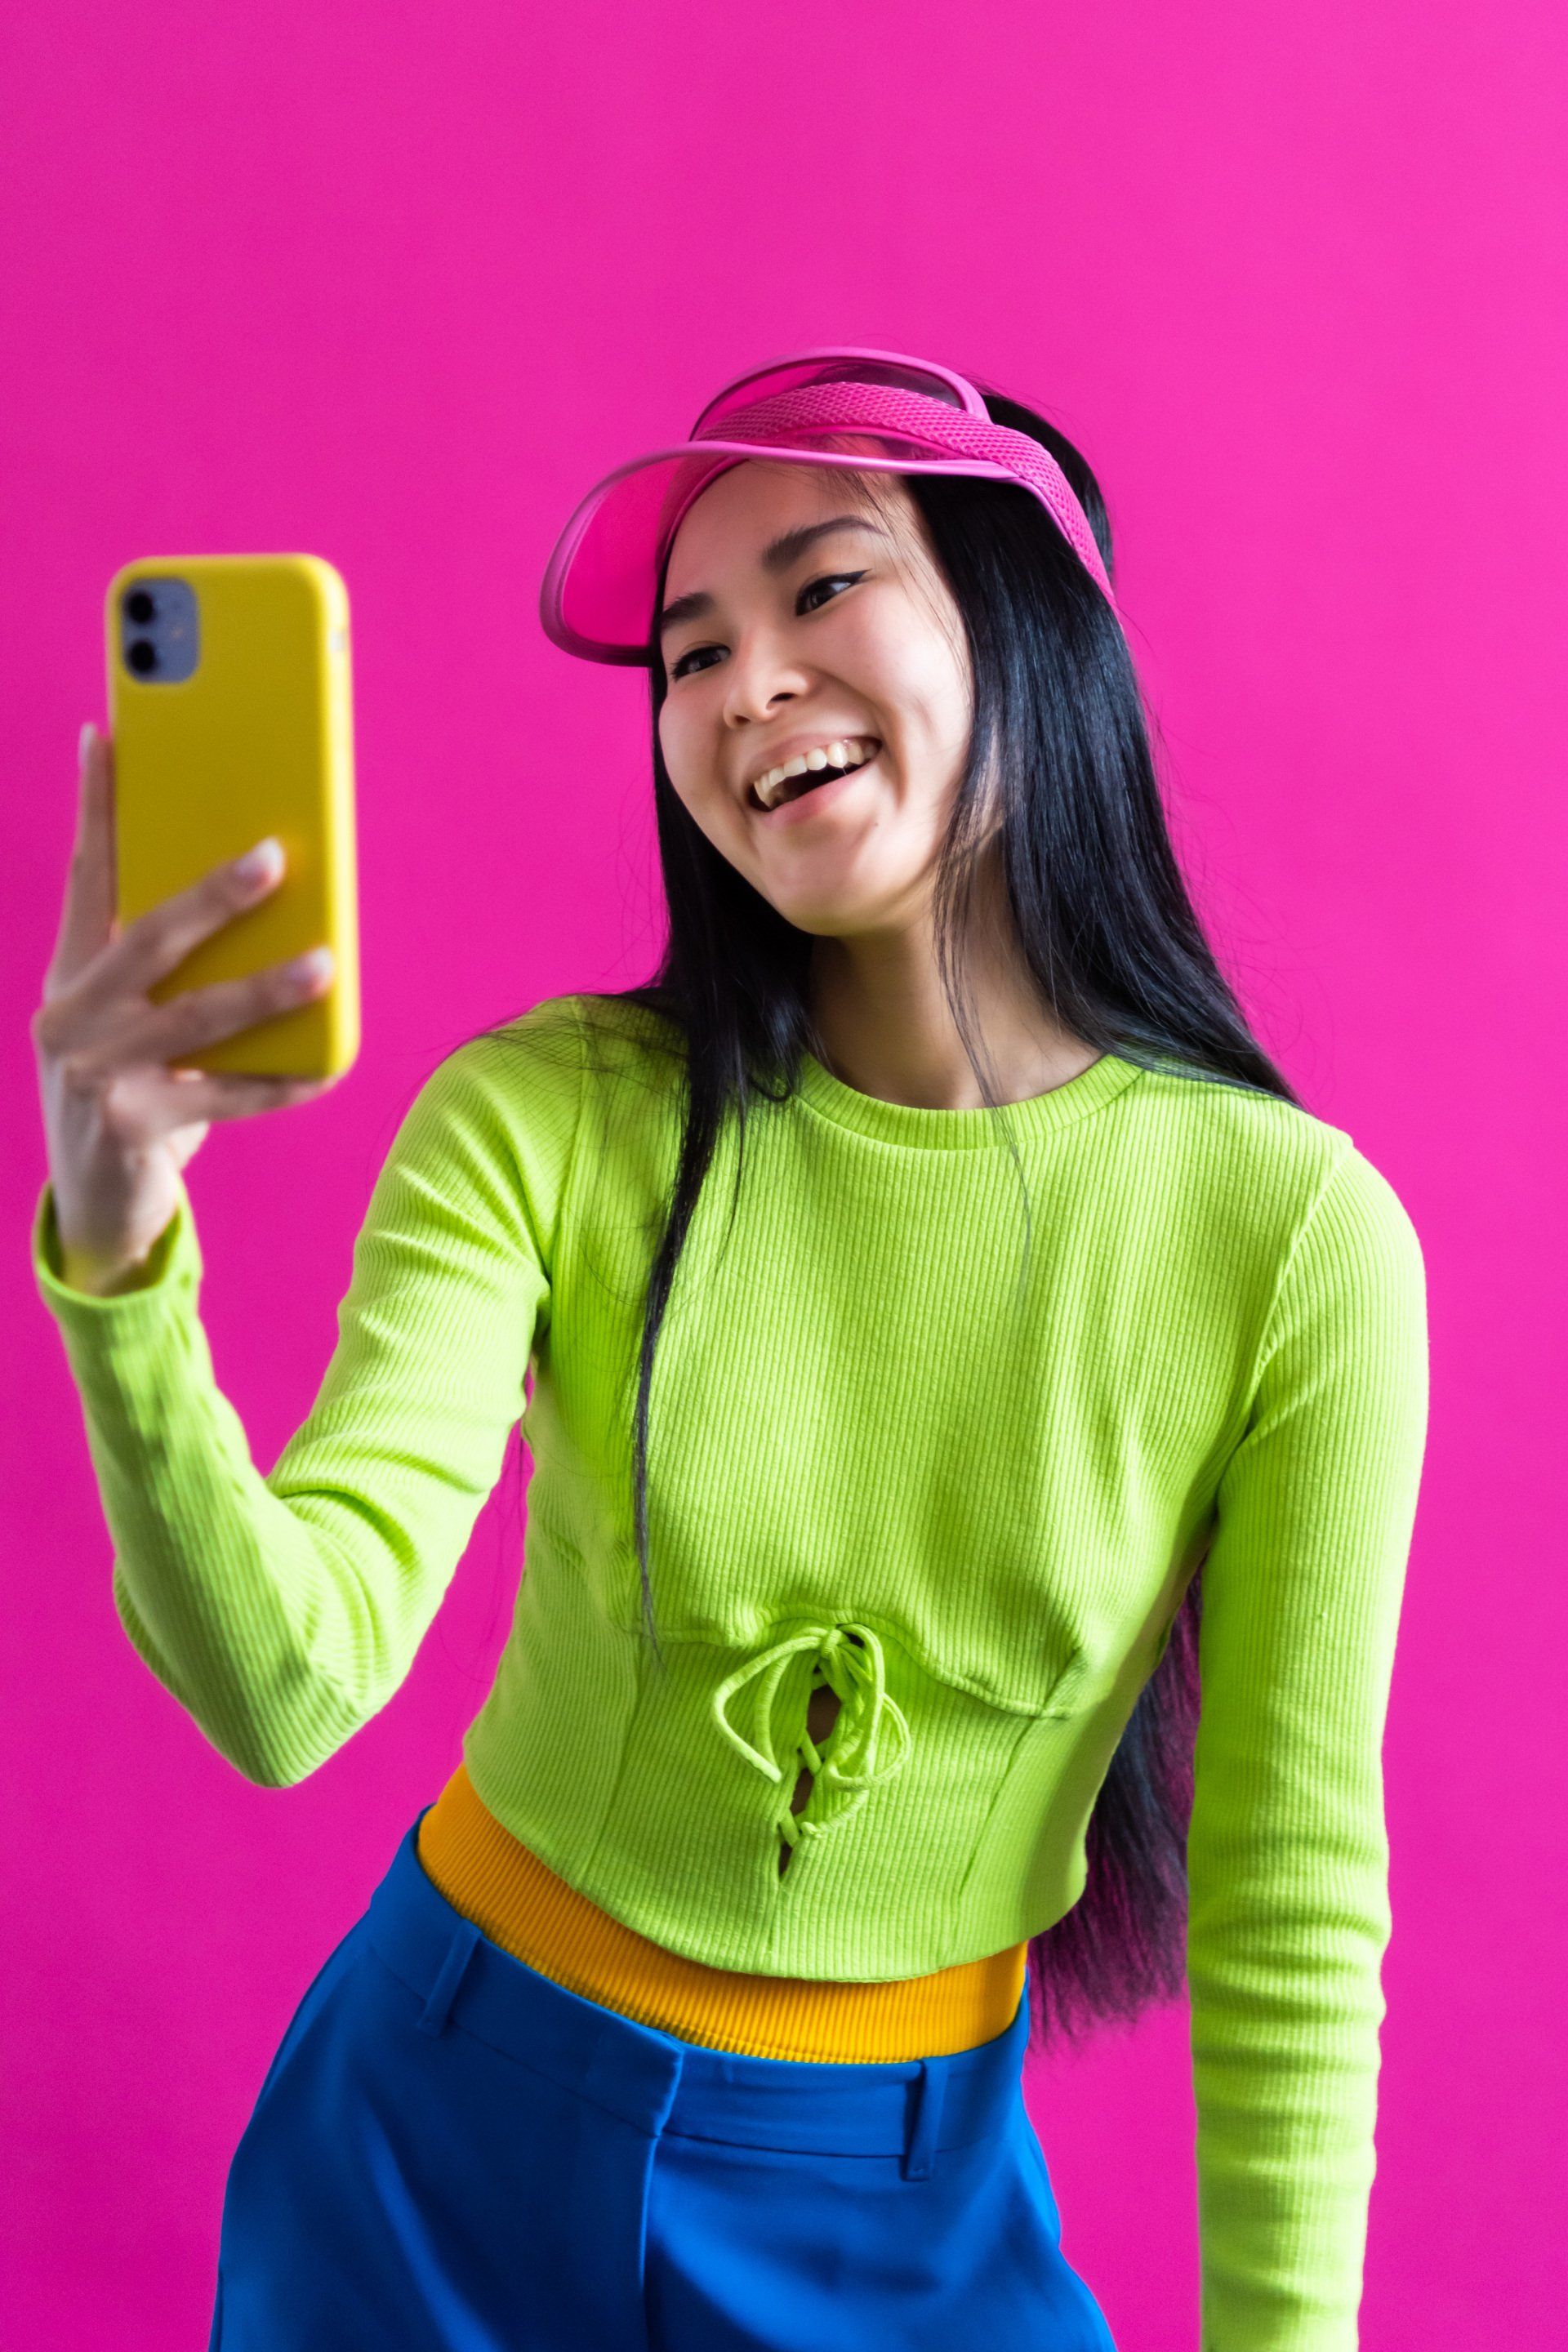 Woman with pink visor taking a selfie with a yellow smart phone